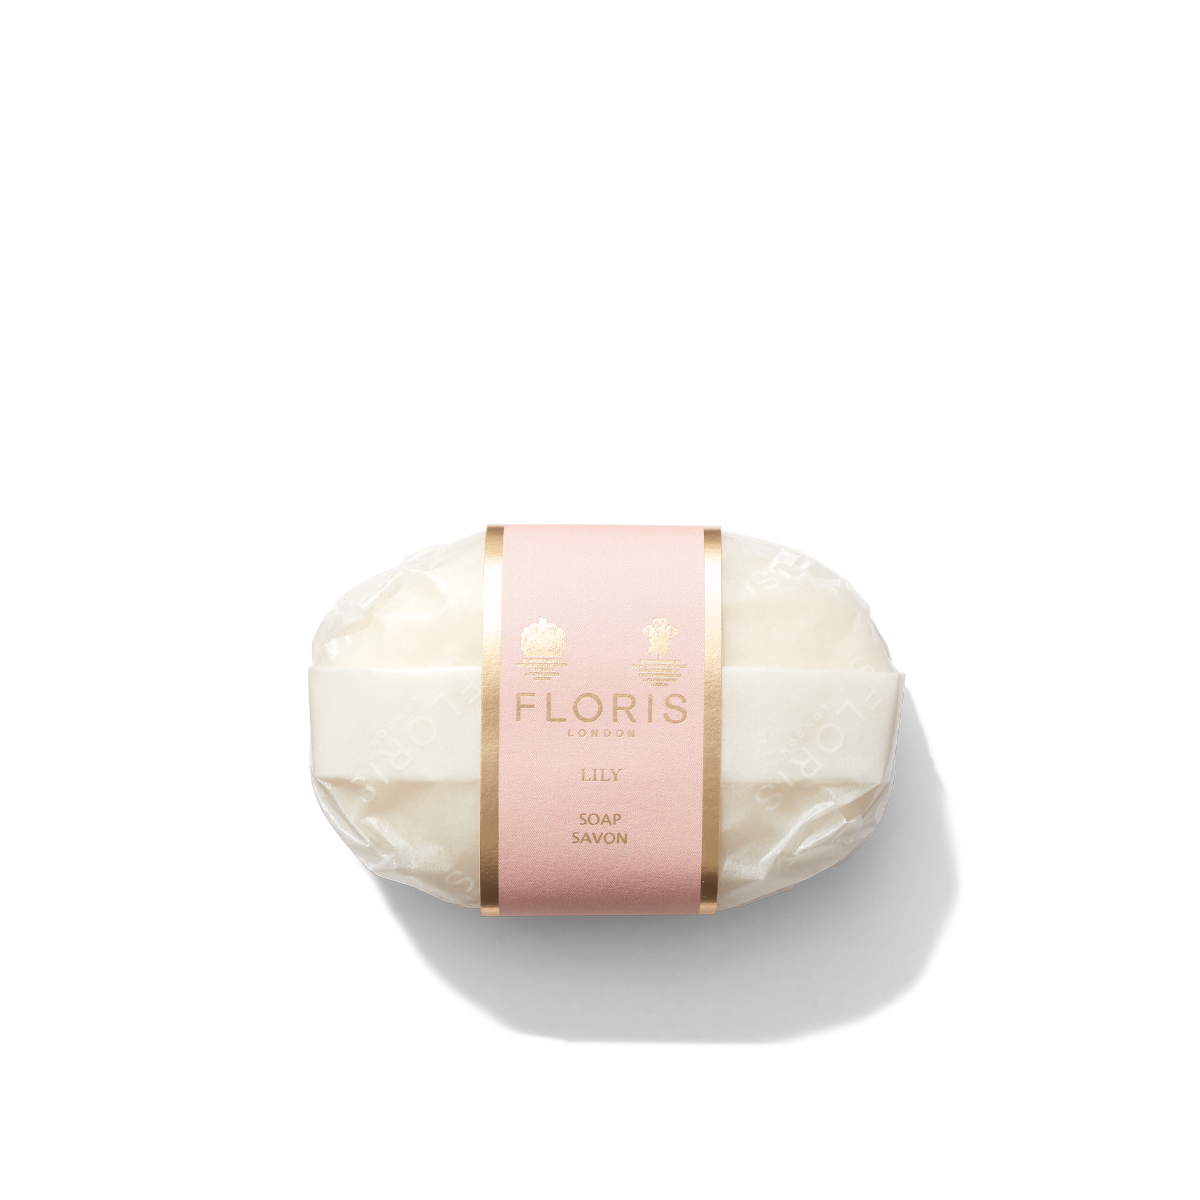 Lily Luxury Soap wrapped in paper with light pink and gold label 